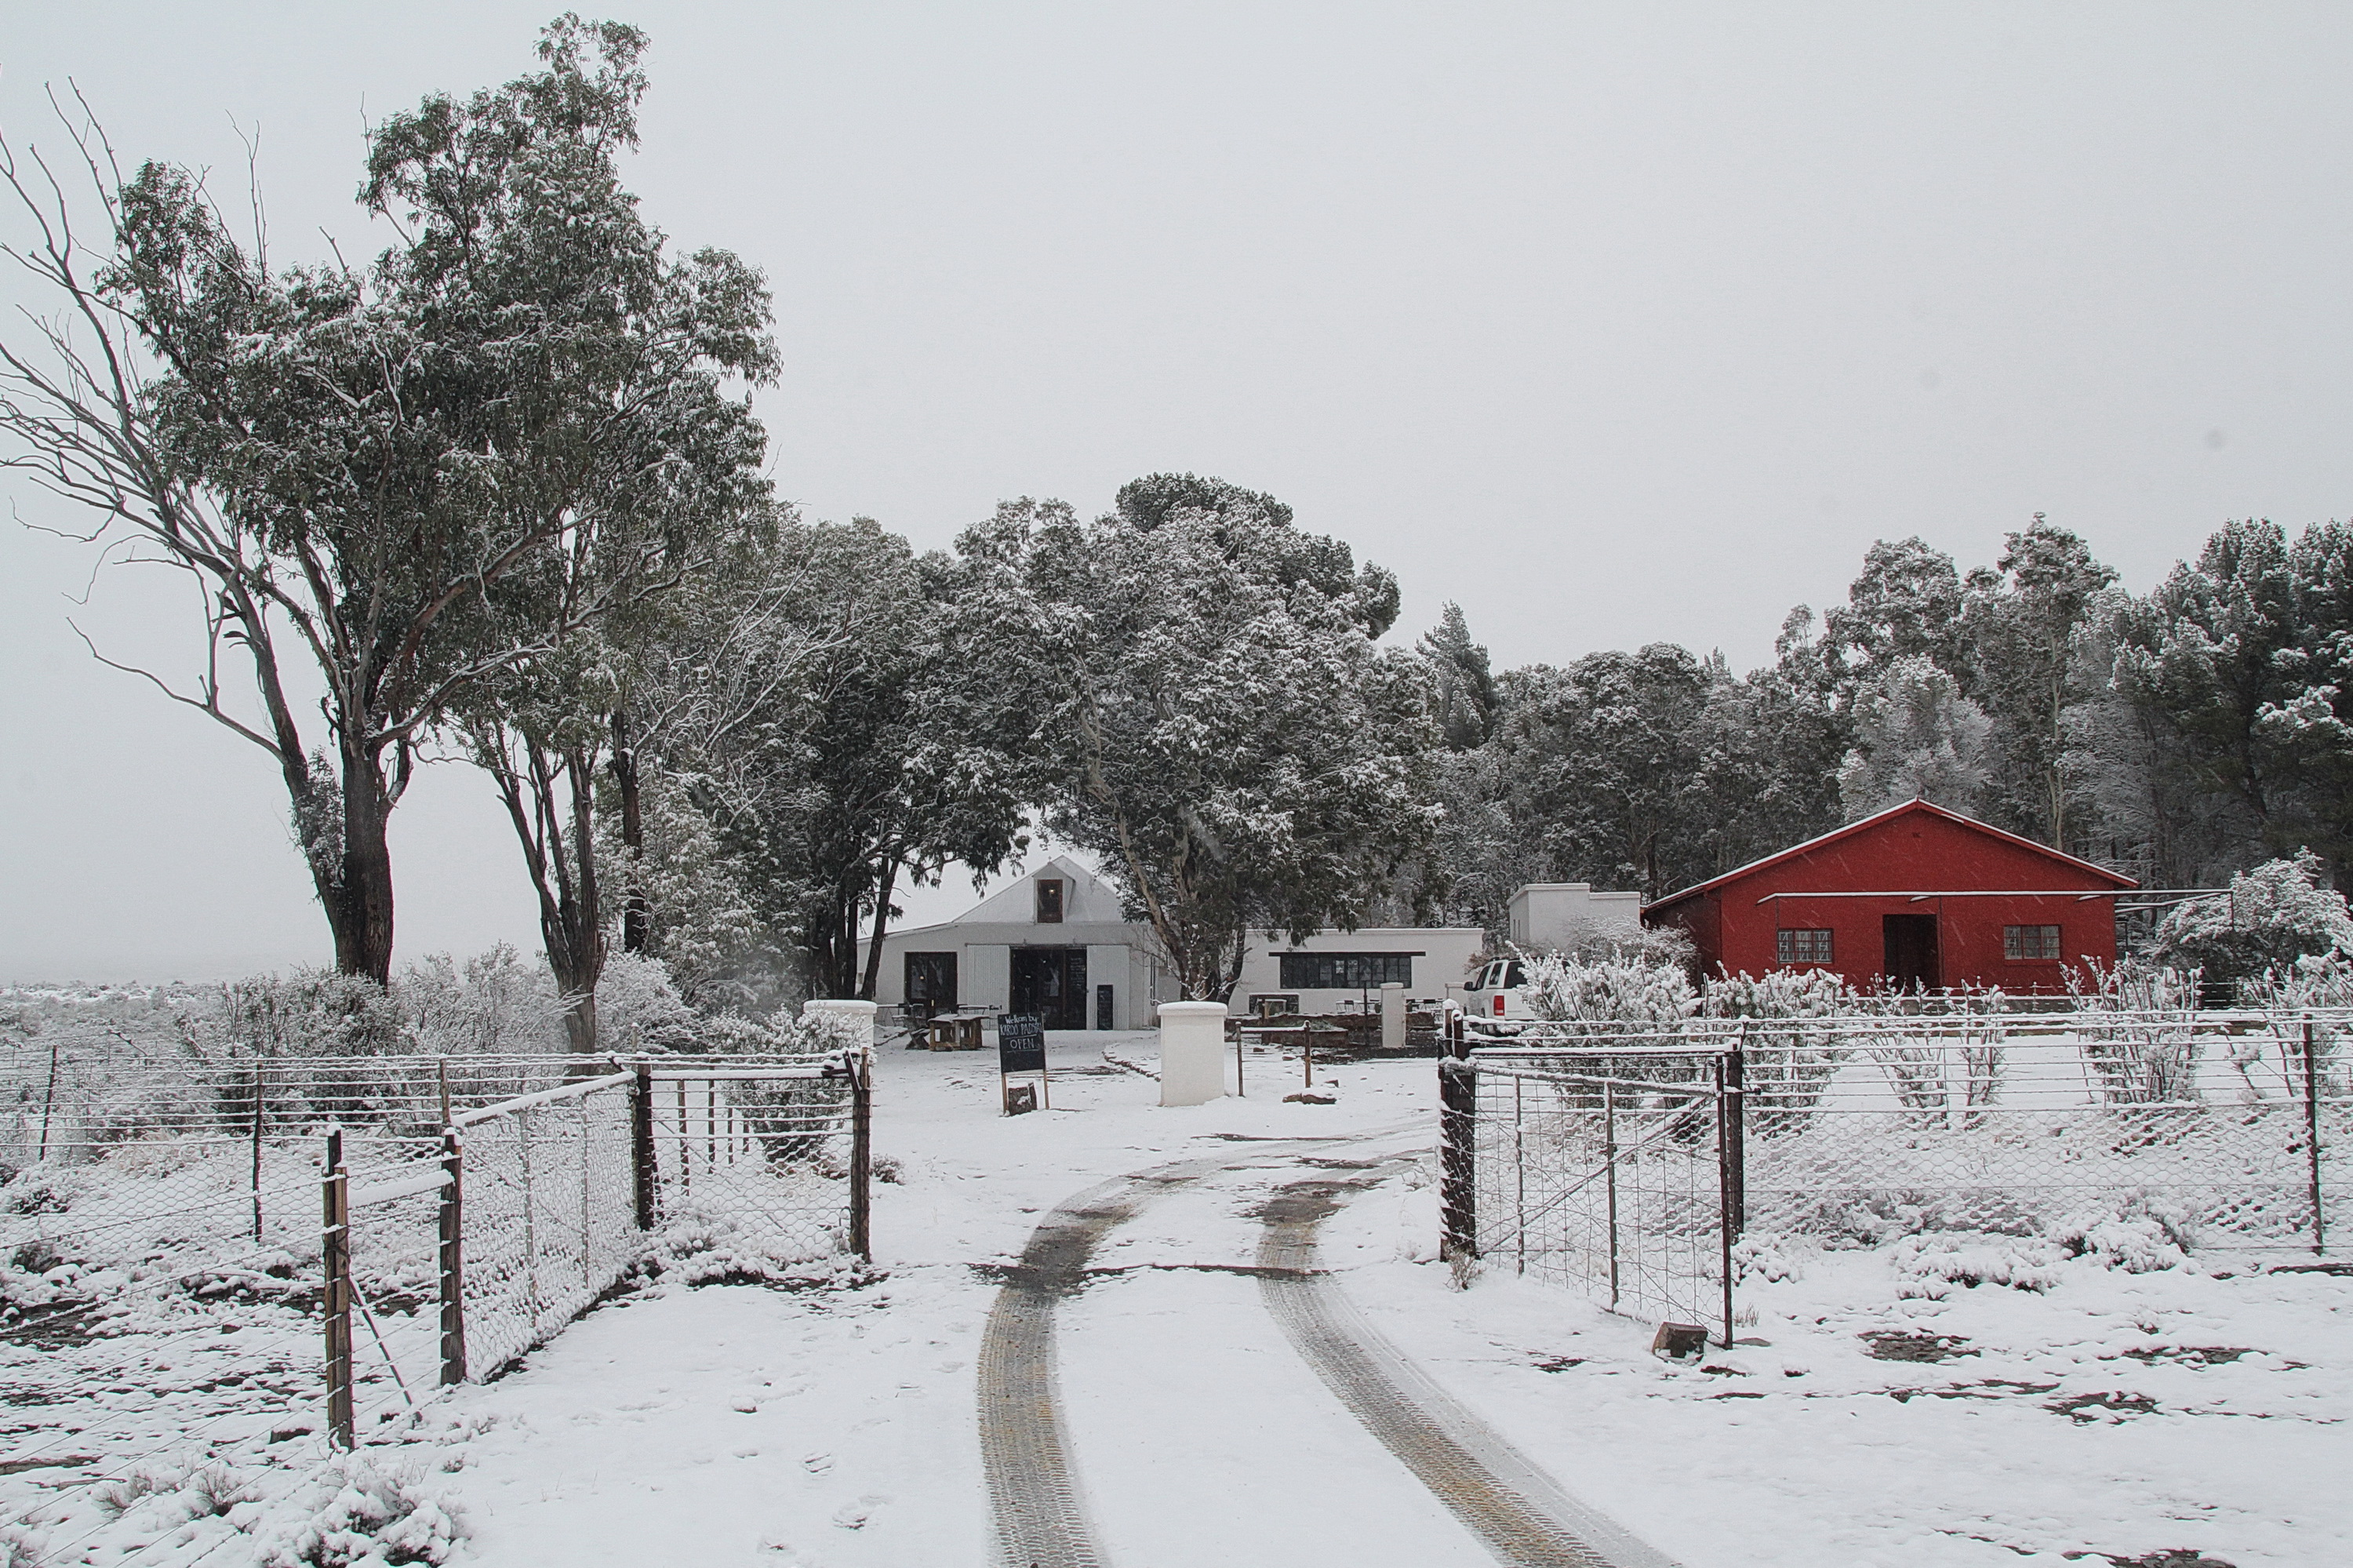 The Karoo Padstal has just opened for business and welcomes hungry snow travellers. Image: Chris Marais